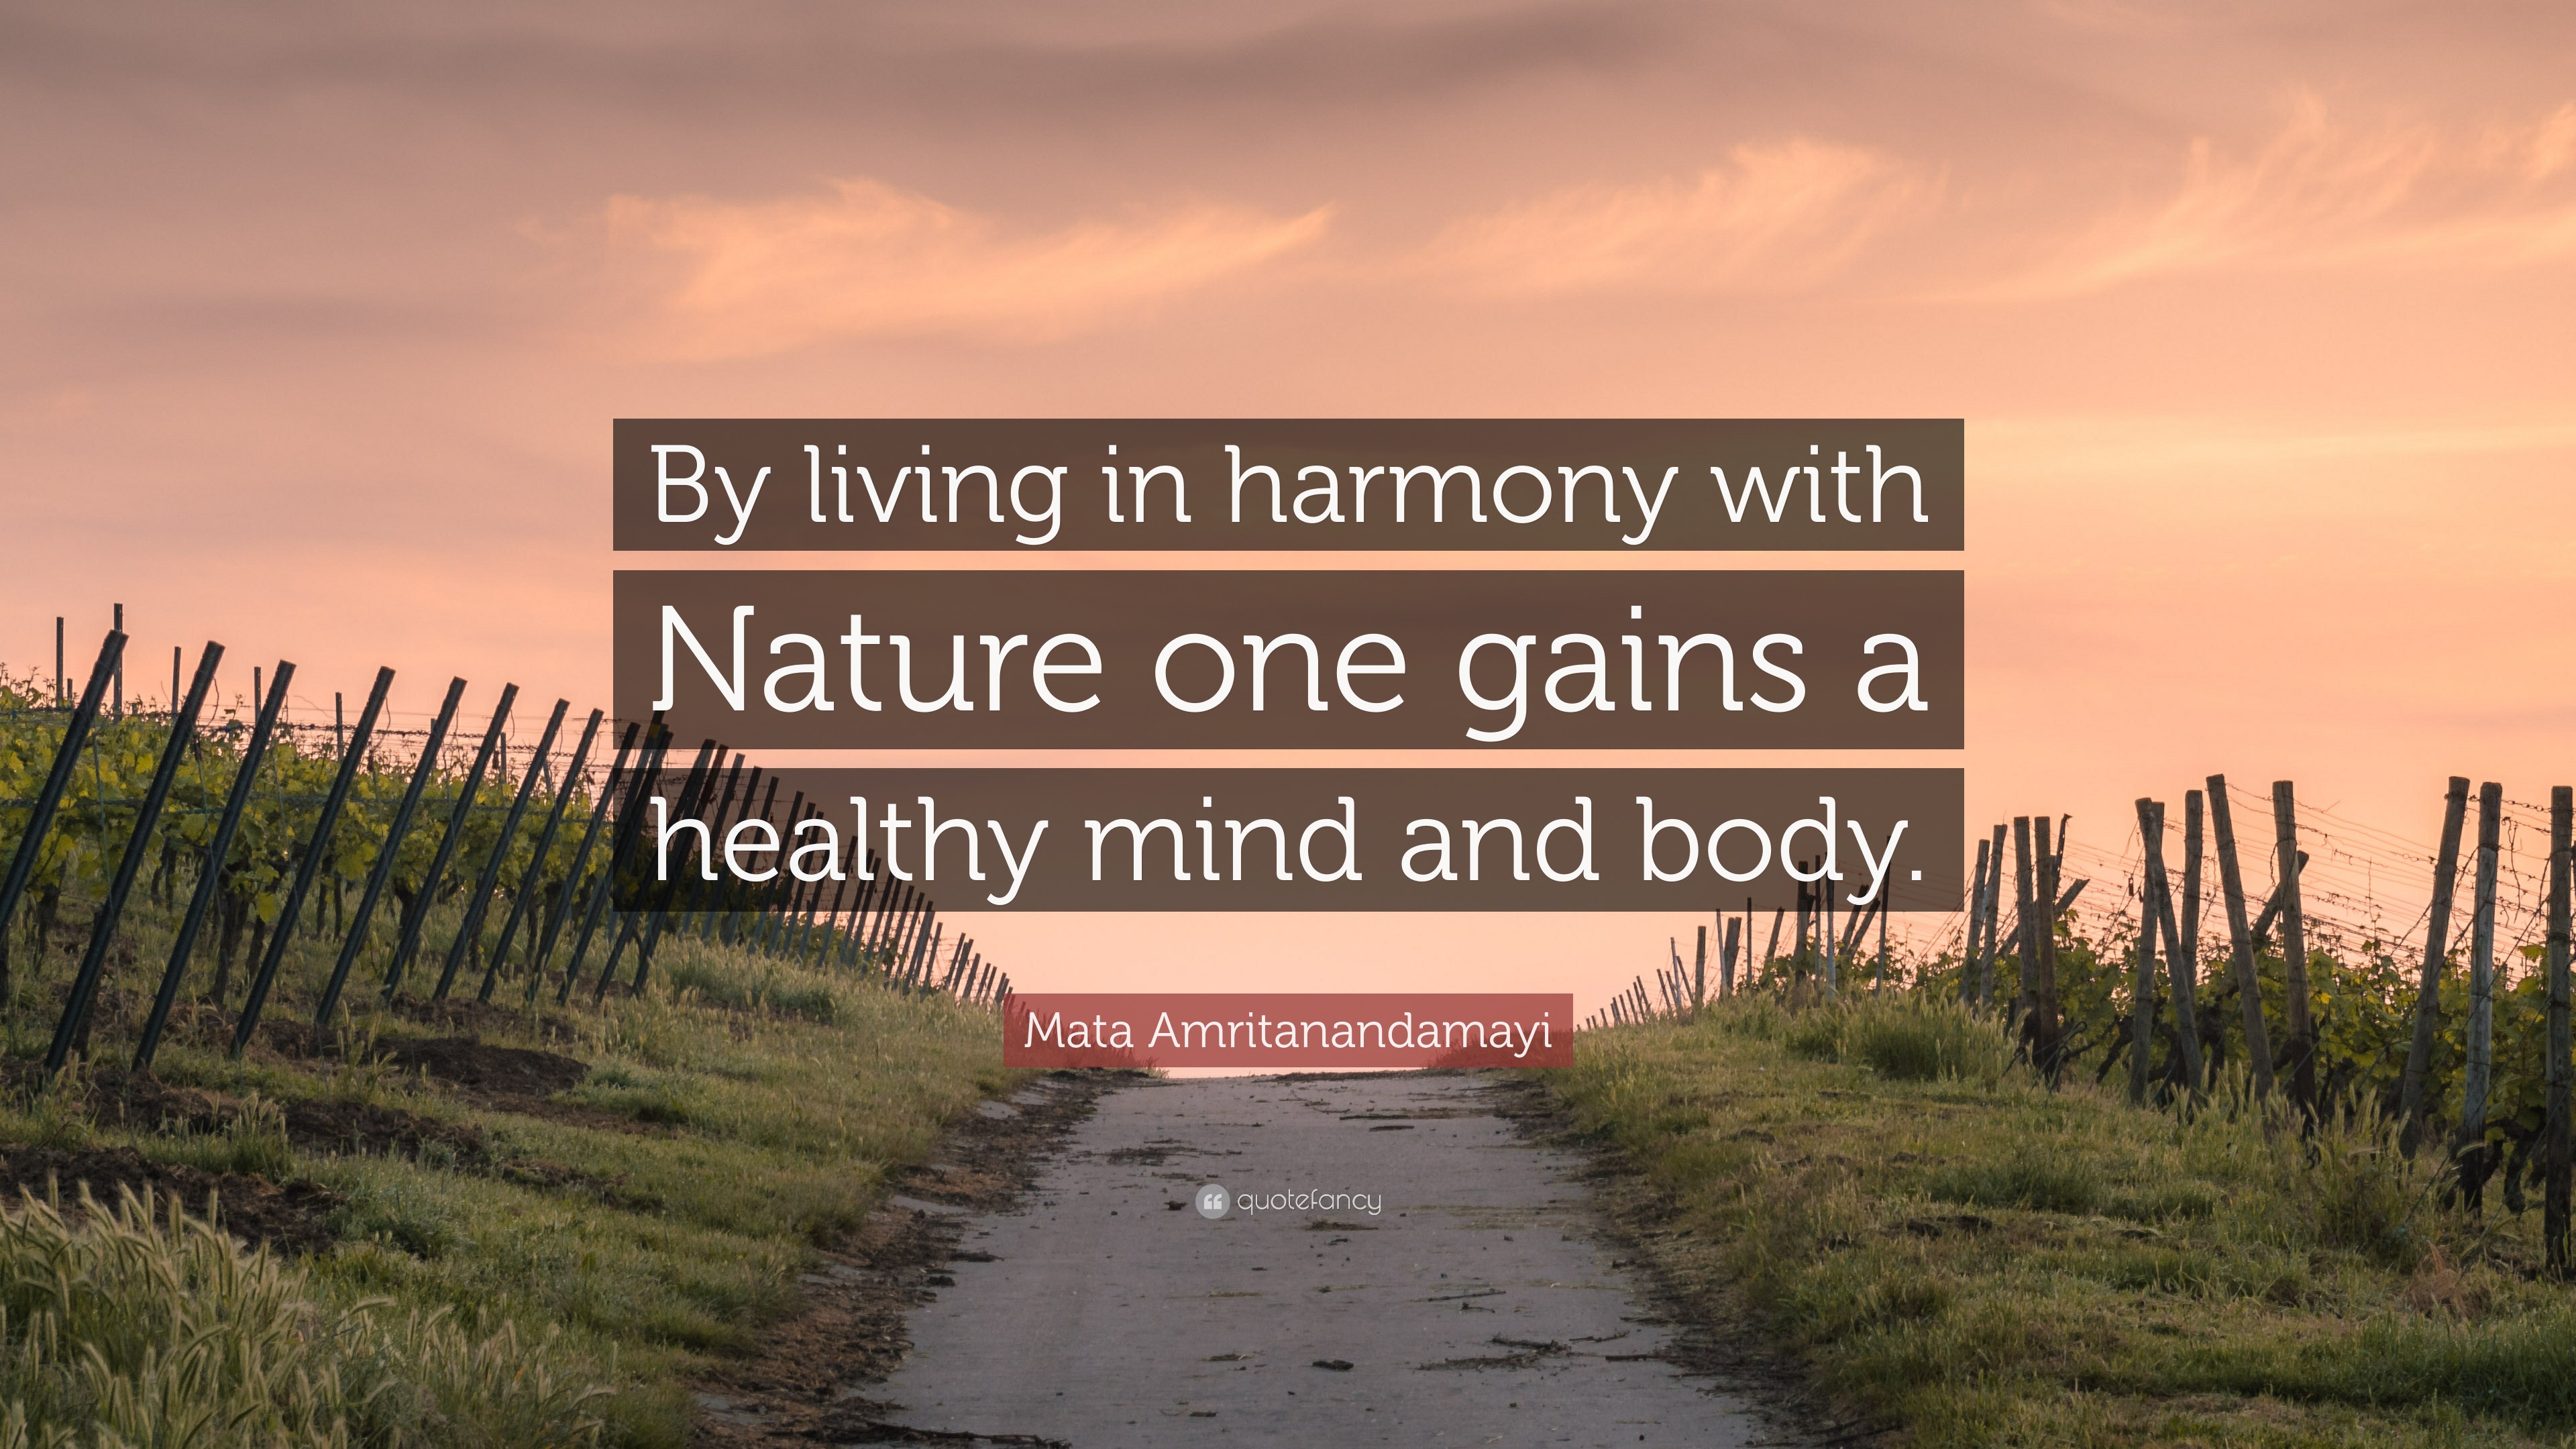 Mata Amritanandamayi Quote By Living In Harmony With Nature One Gains A Healthy Mind And Body 7 Wallpapers Quotefancy